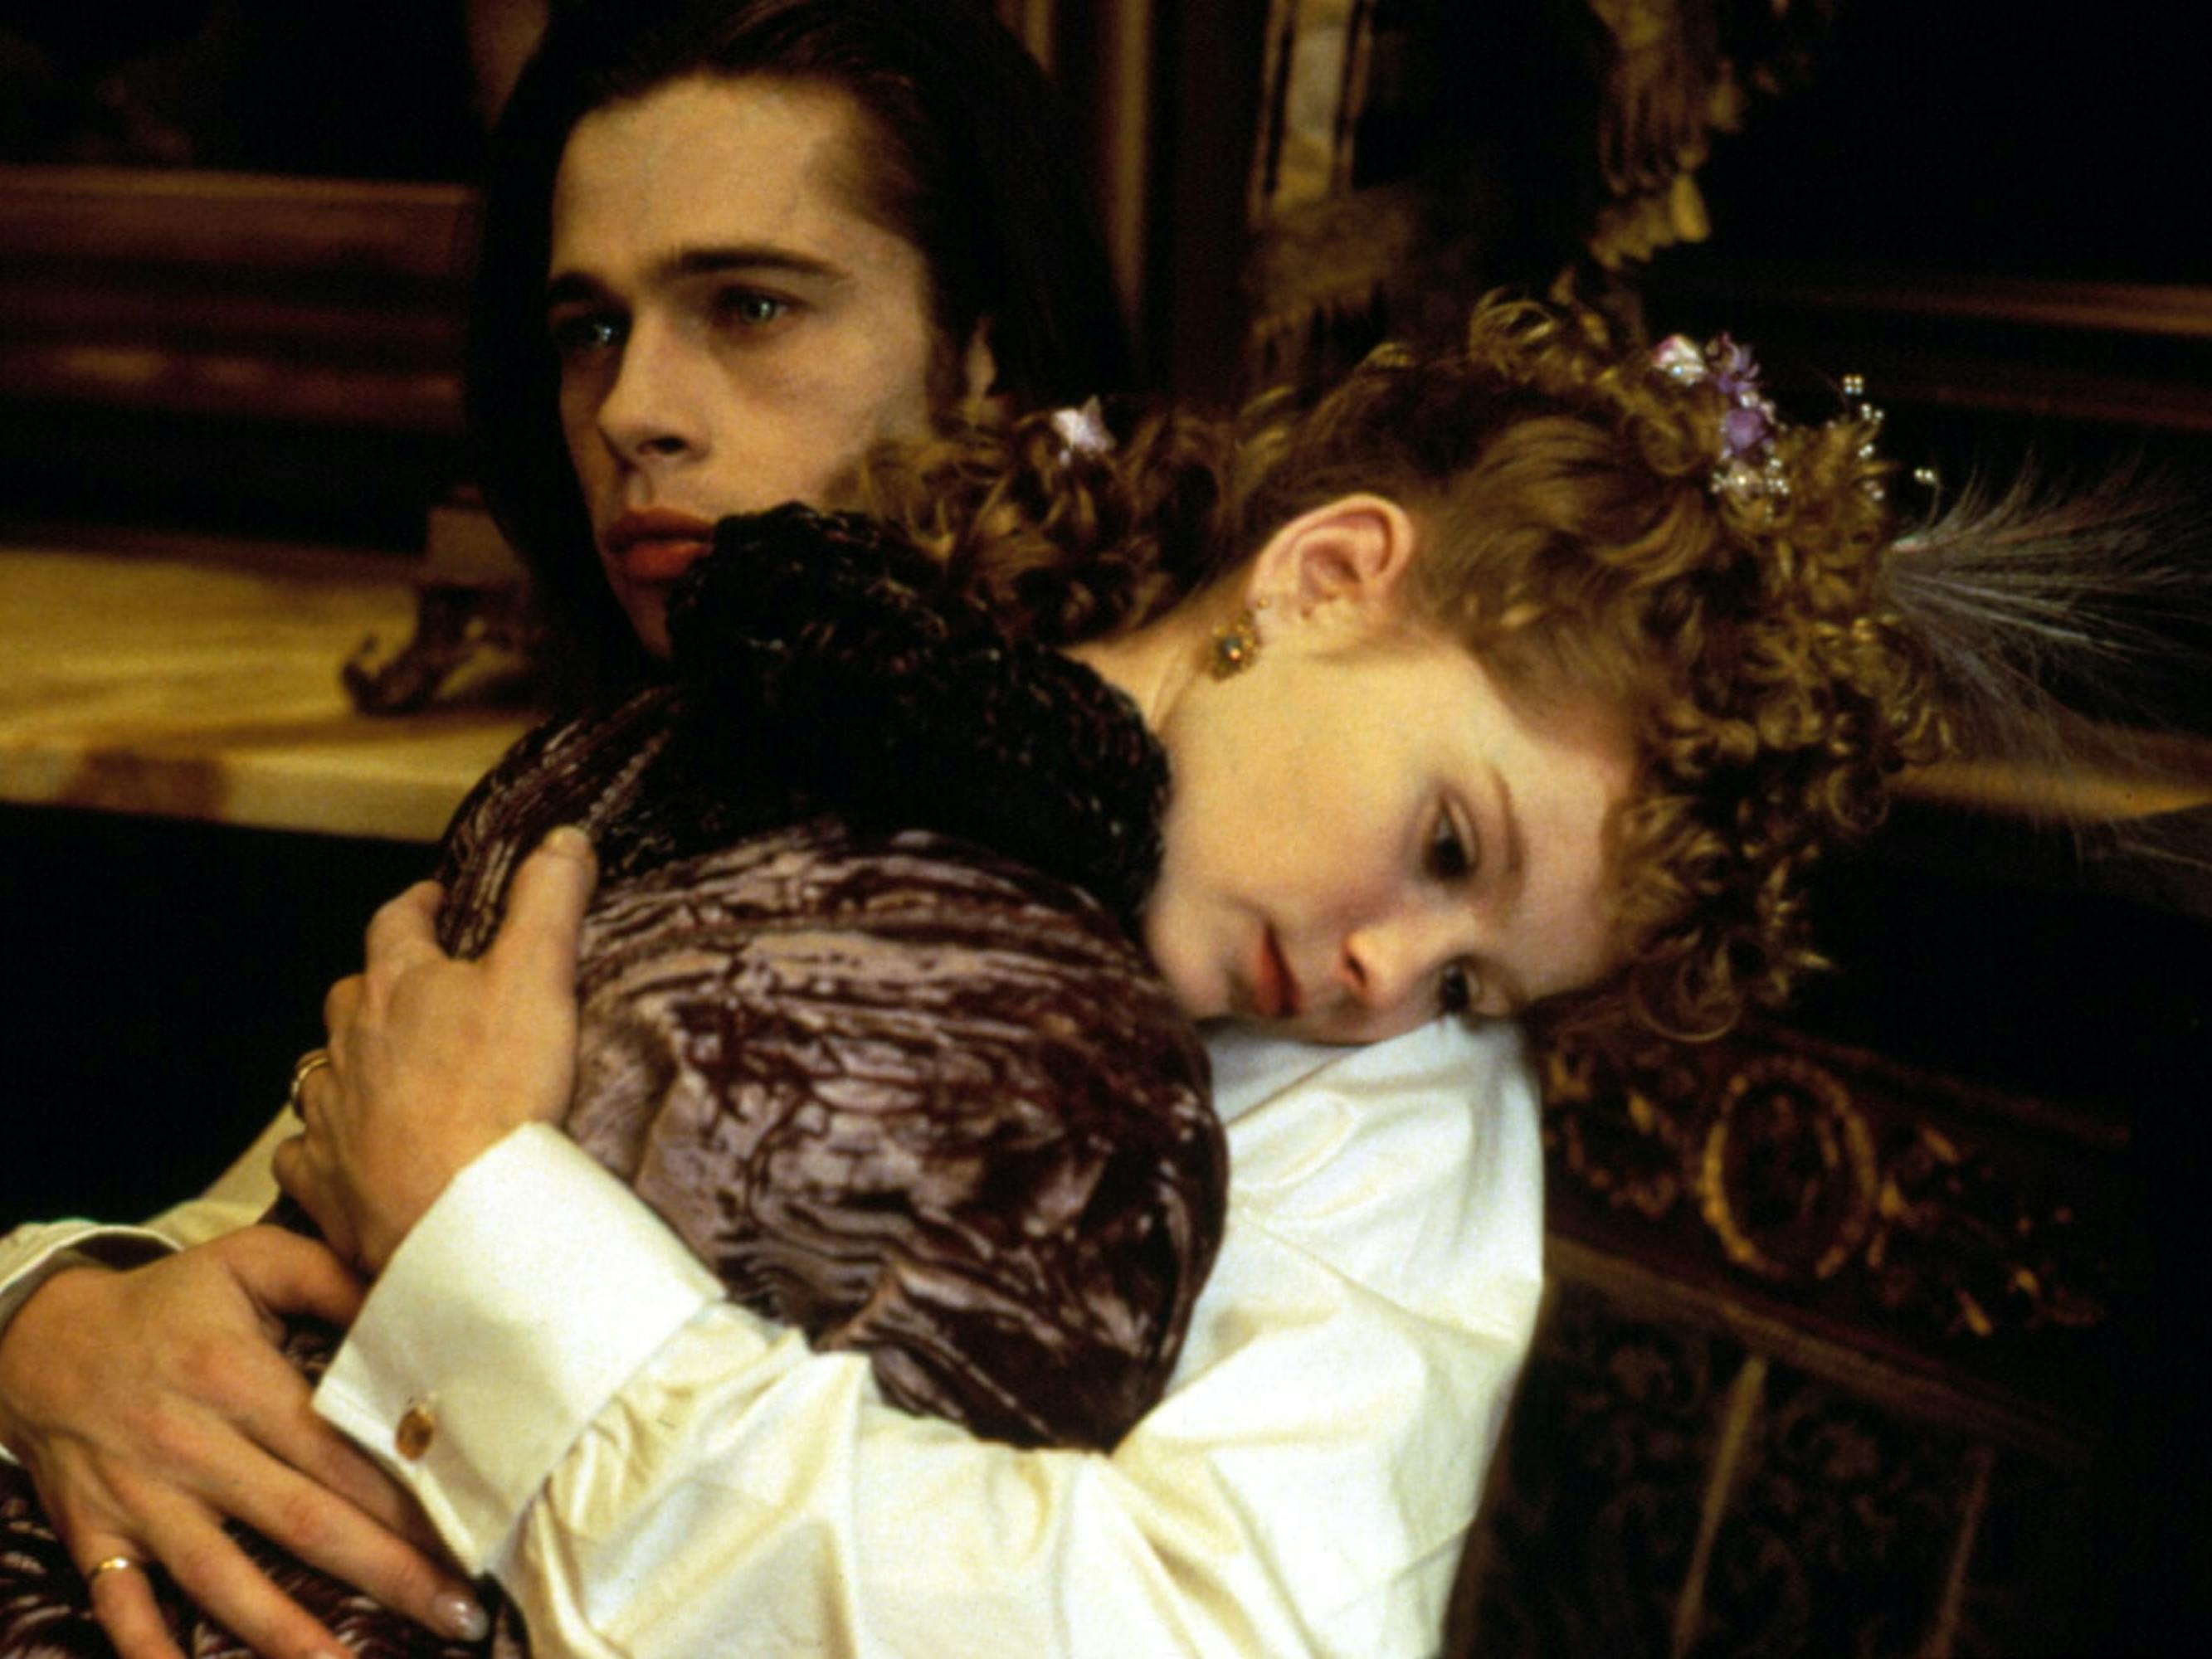 Louis (Brad Pitt) wears a white shirt and holds Claudia (Kirsten Dunst) who wears a dark velvet shirt and a headpiece.